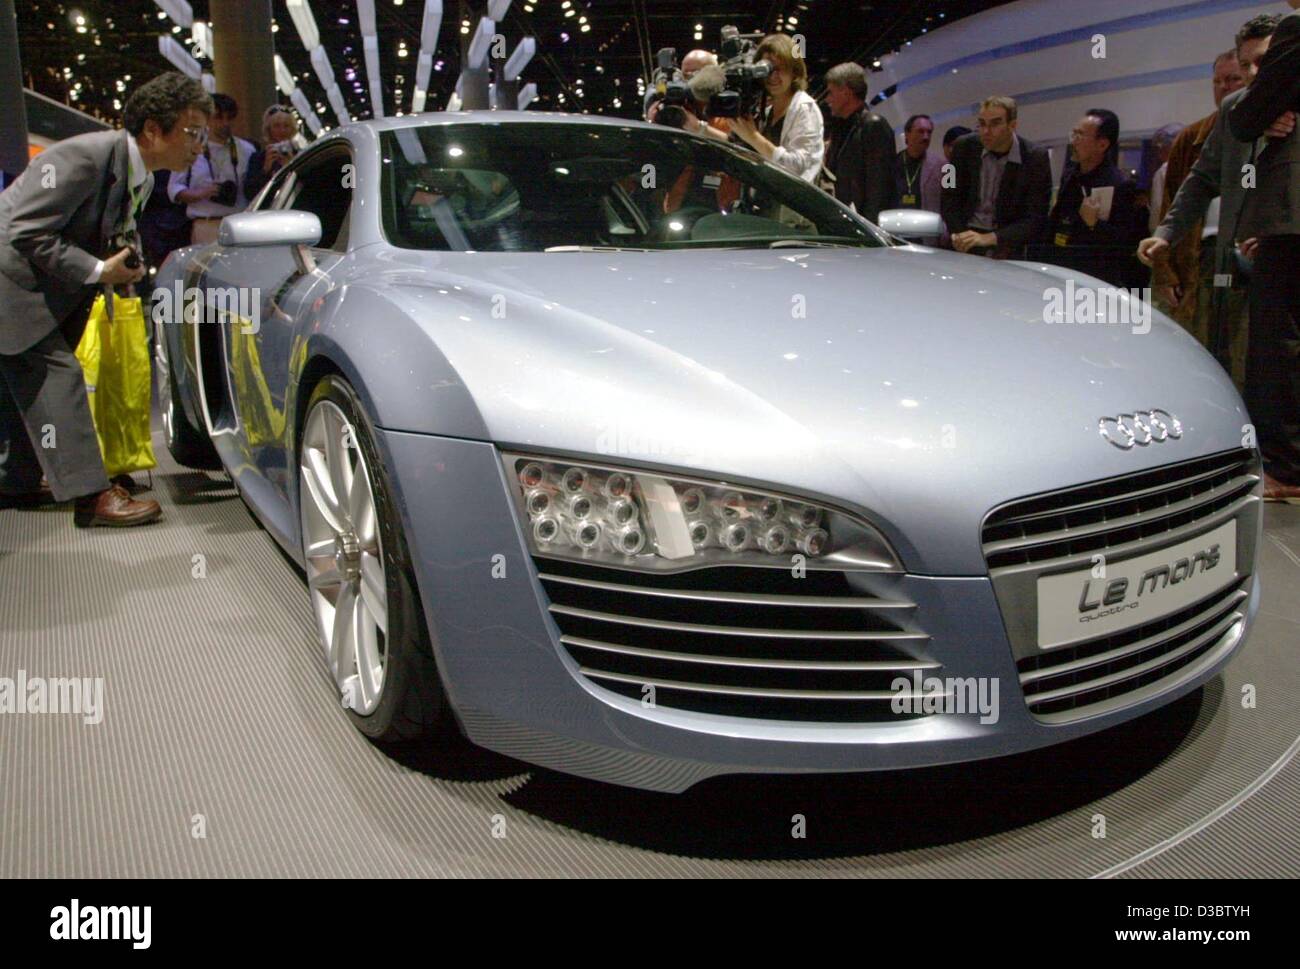 (dpa) - Journalists examine the newly introduced concept study car model 'Le Mans quattro' by Audi at the international automobile show IAA in Frankfurt main, Germany,  8 September 2003. The sports car's body consists of aluminium and is powered by a five liter V10-FSI power unit with a turbo charge Stock Photo